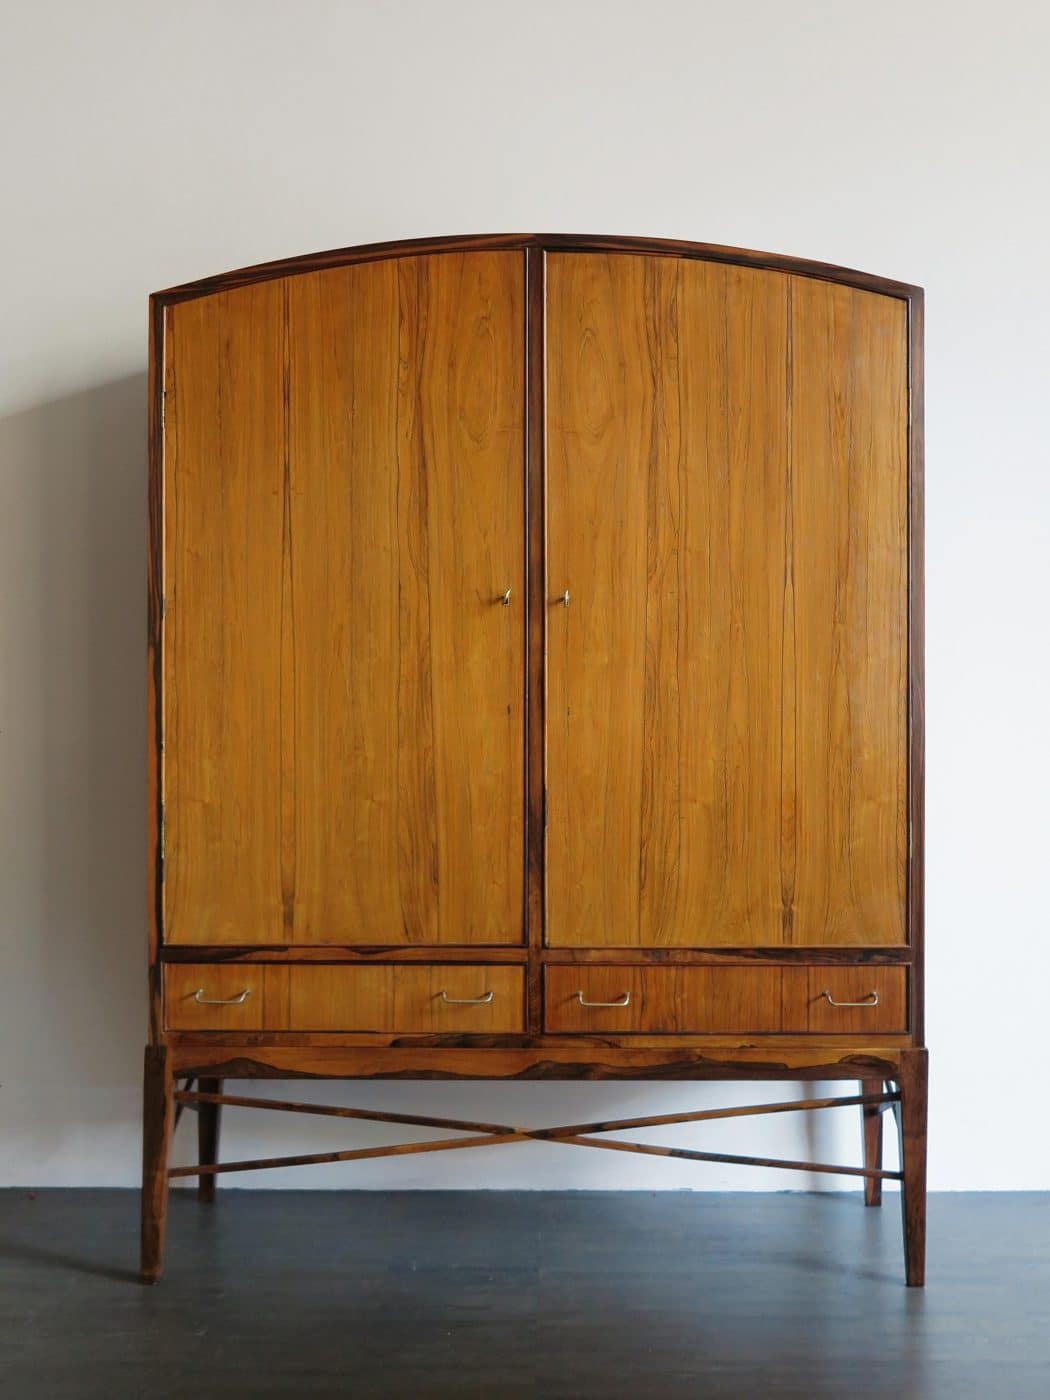 A wooden 1960s Danish cabinet